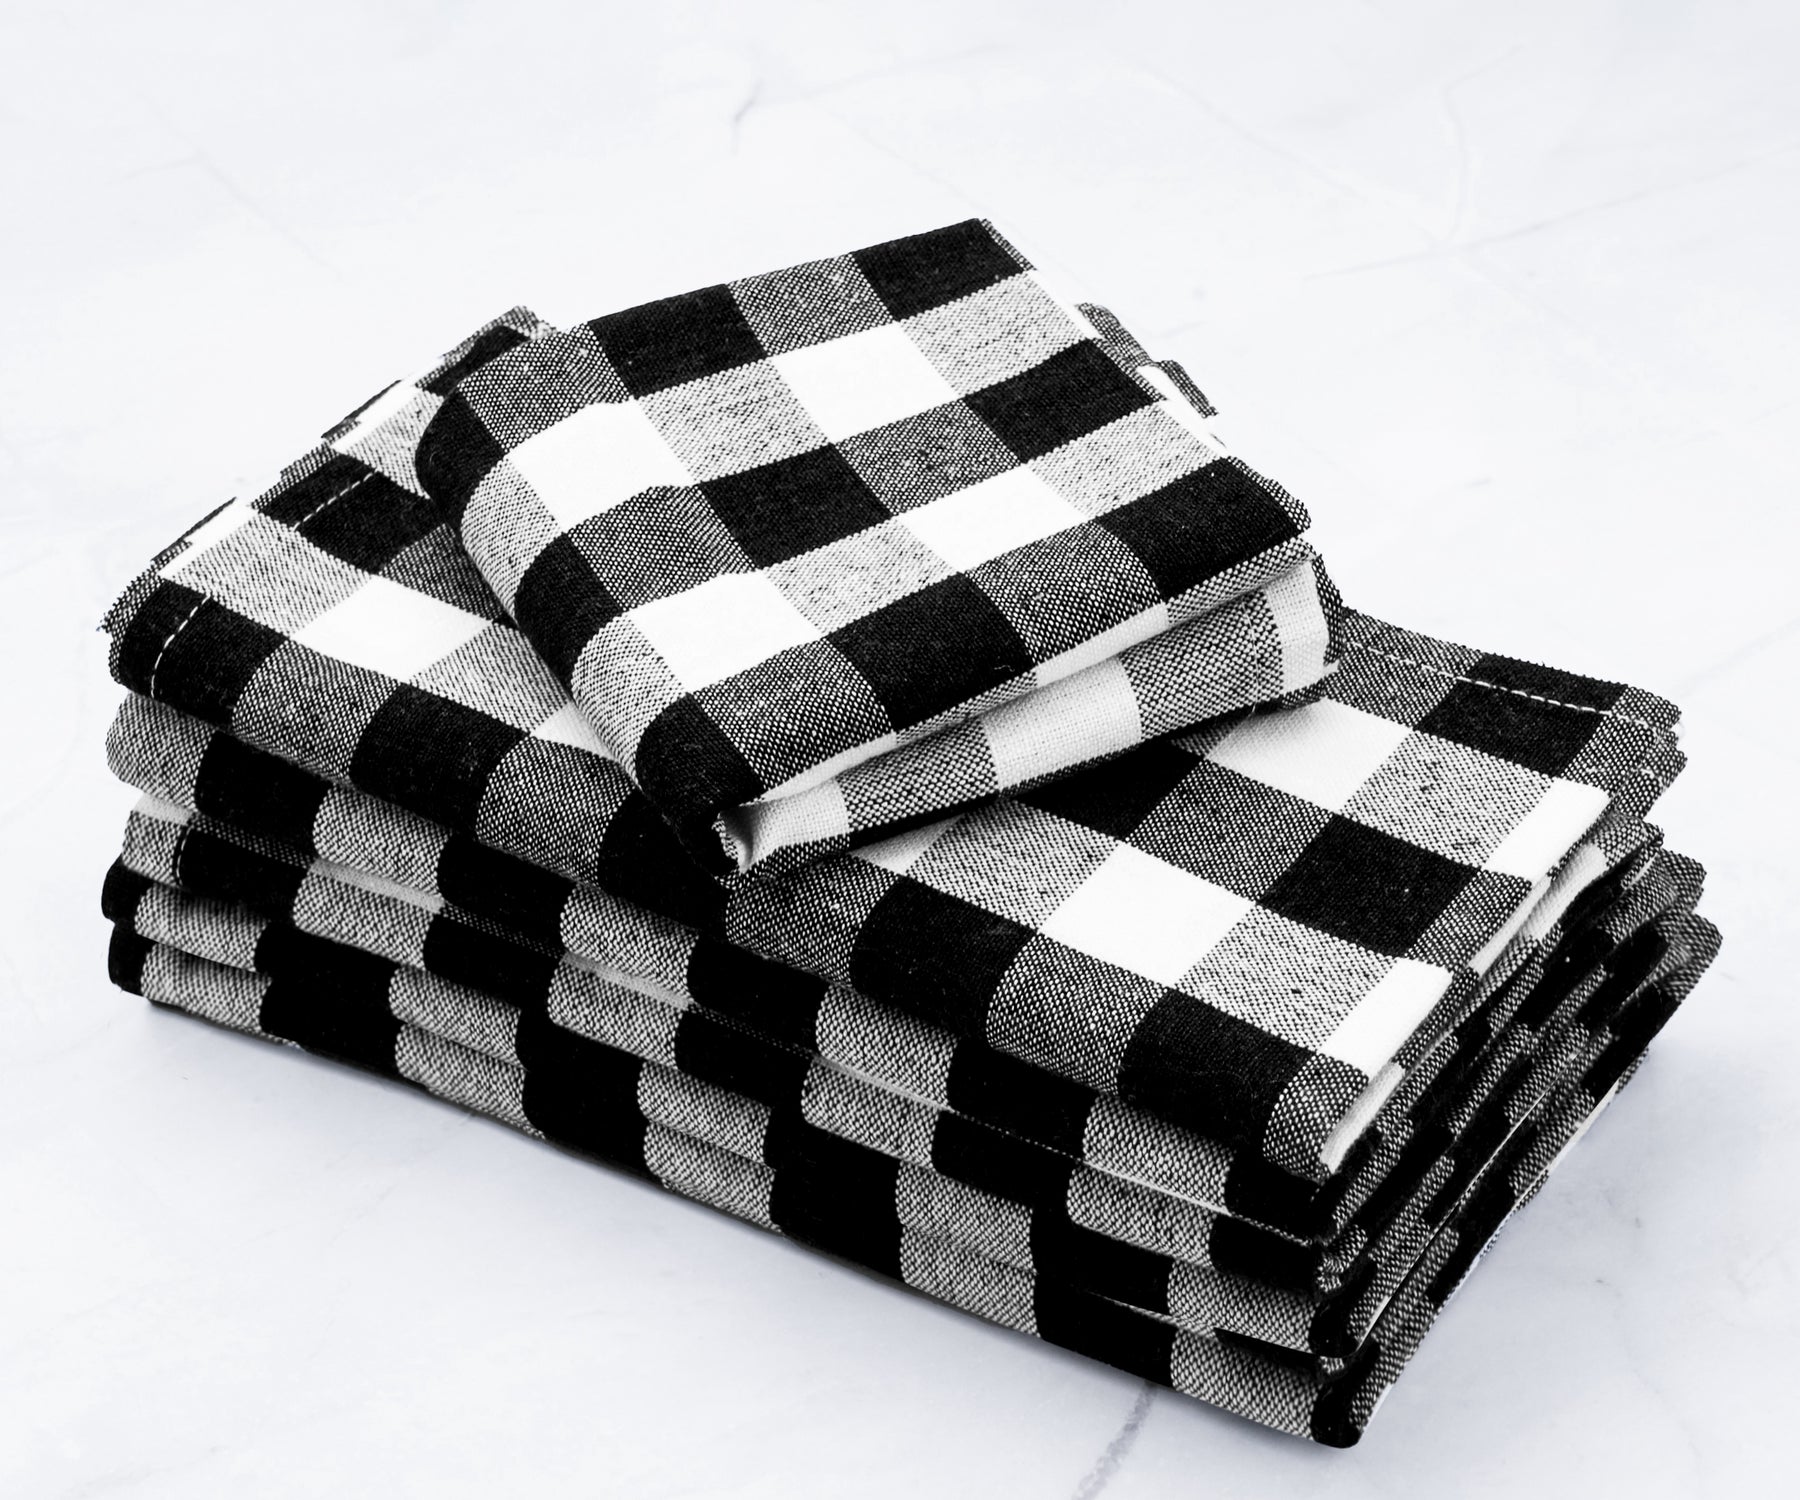 Checkered napkins, a versatile choice for casual or formal dining.